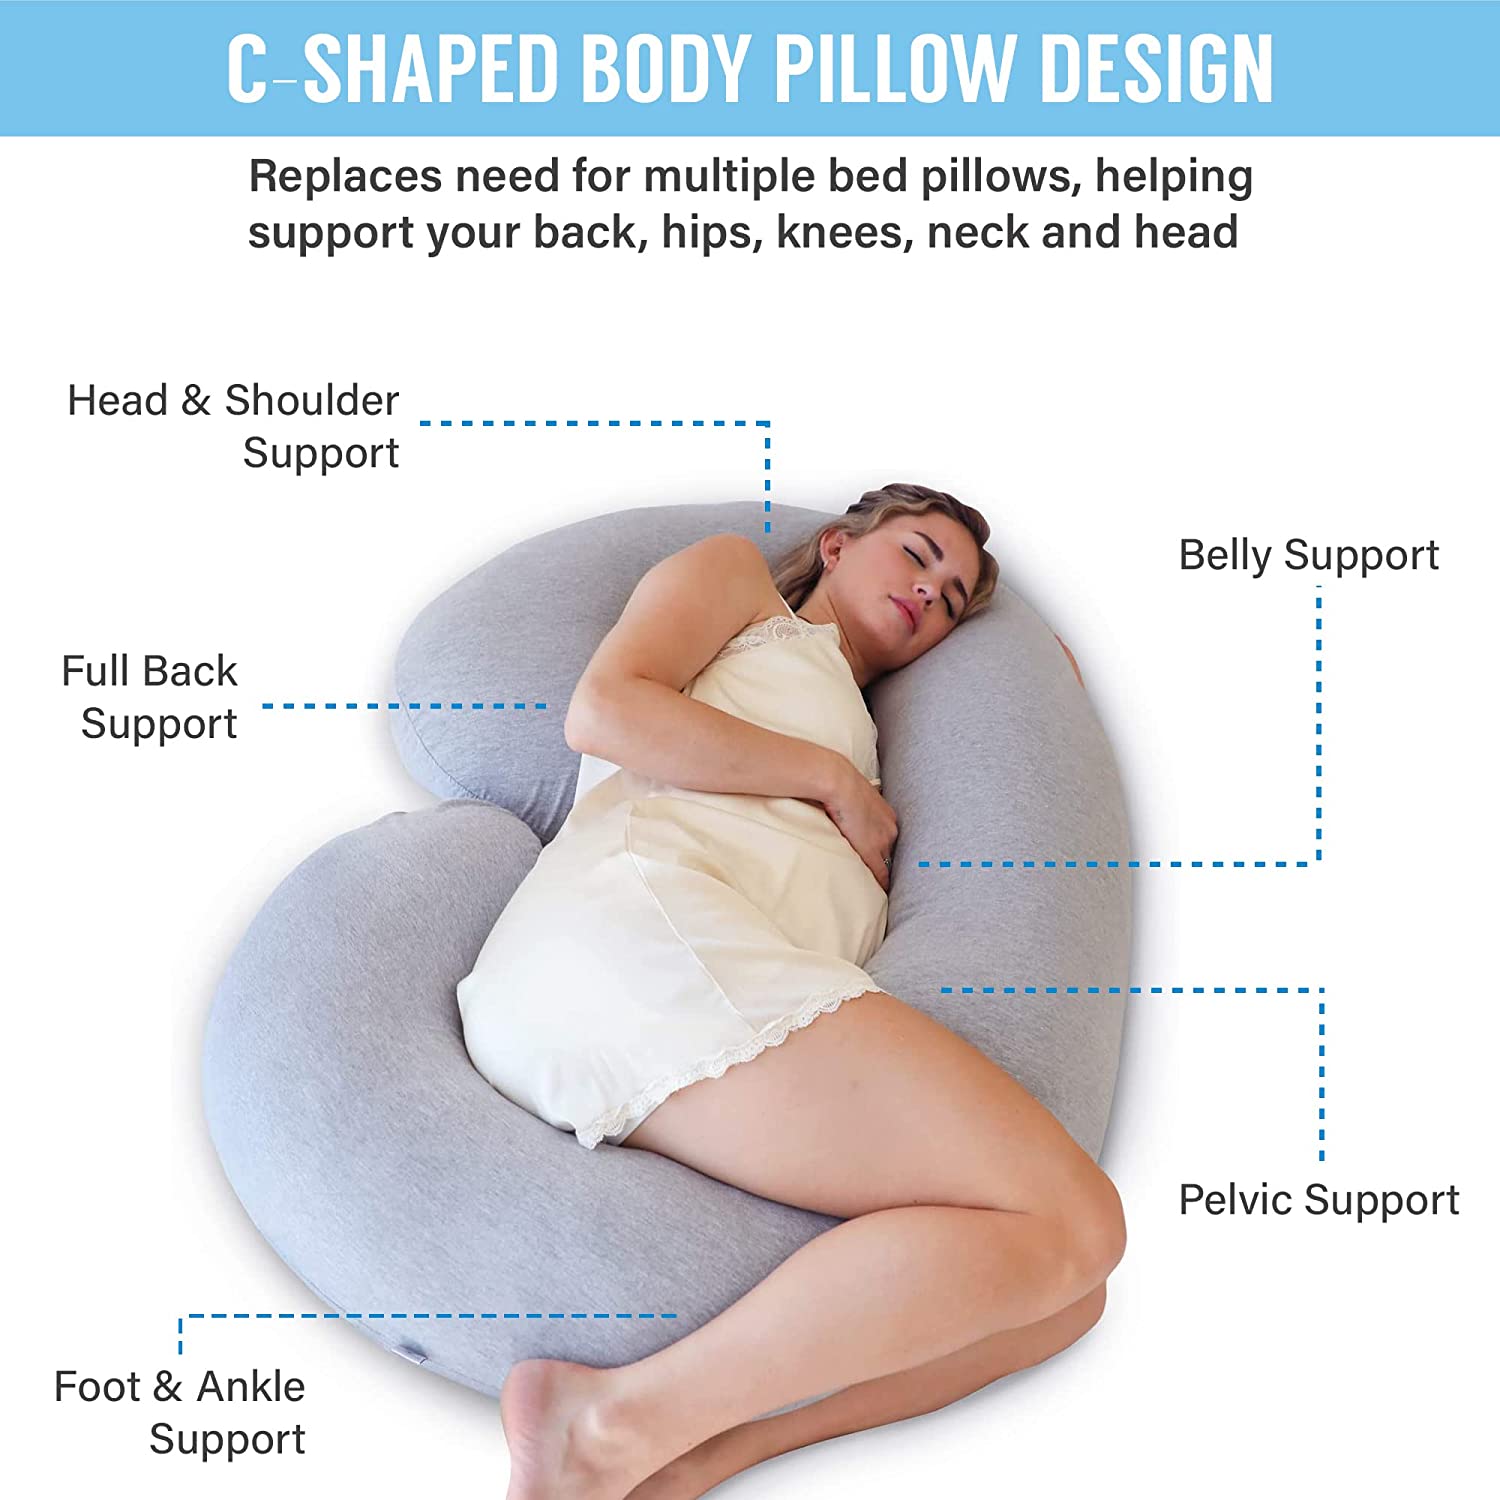 PharMeDoc Pregnancy Pillow - C-Shaped Body Pillow for Pregnant Women - Jersey Cover, Gray - image 3 of 8